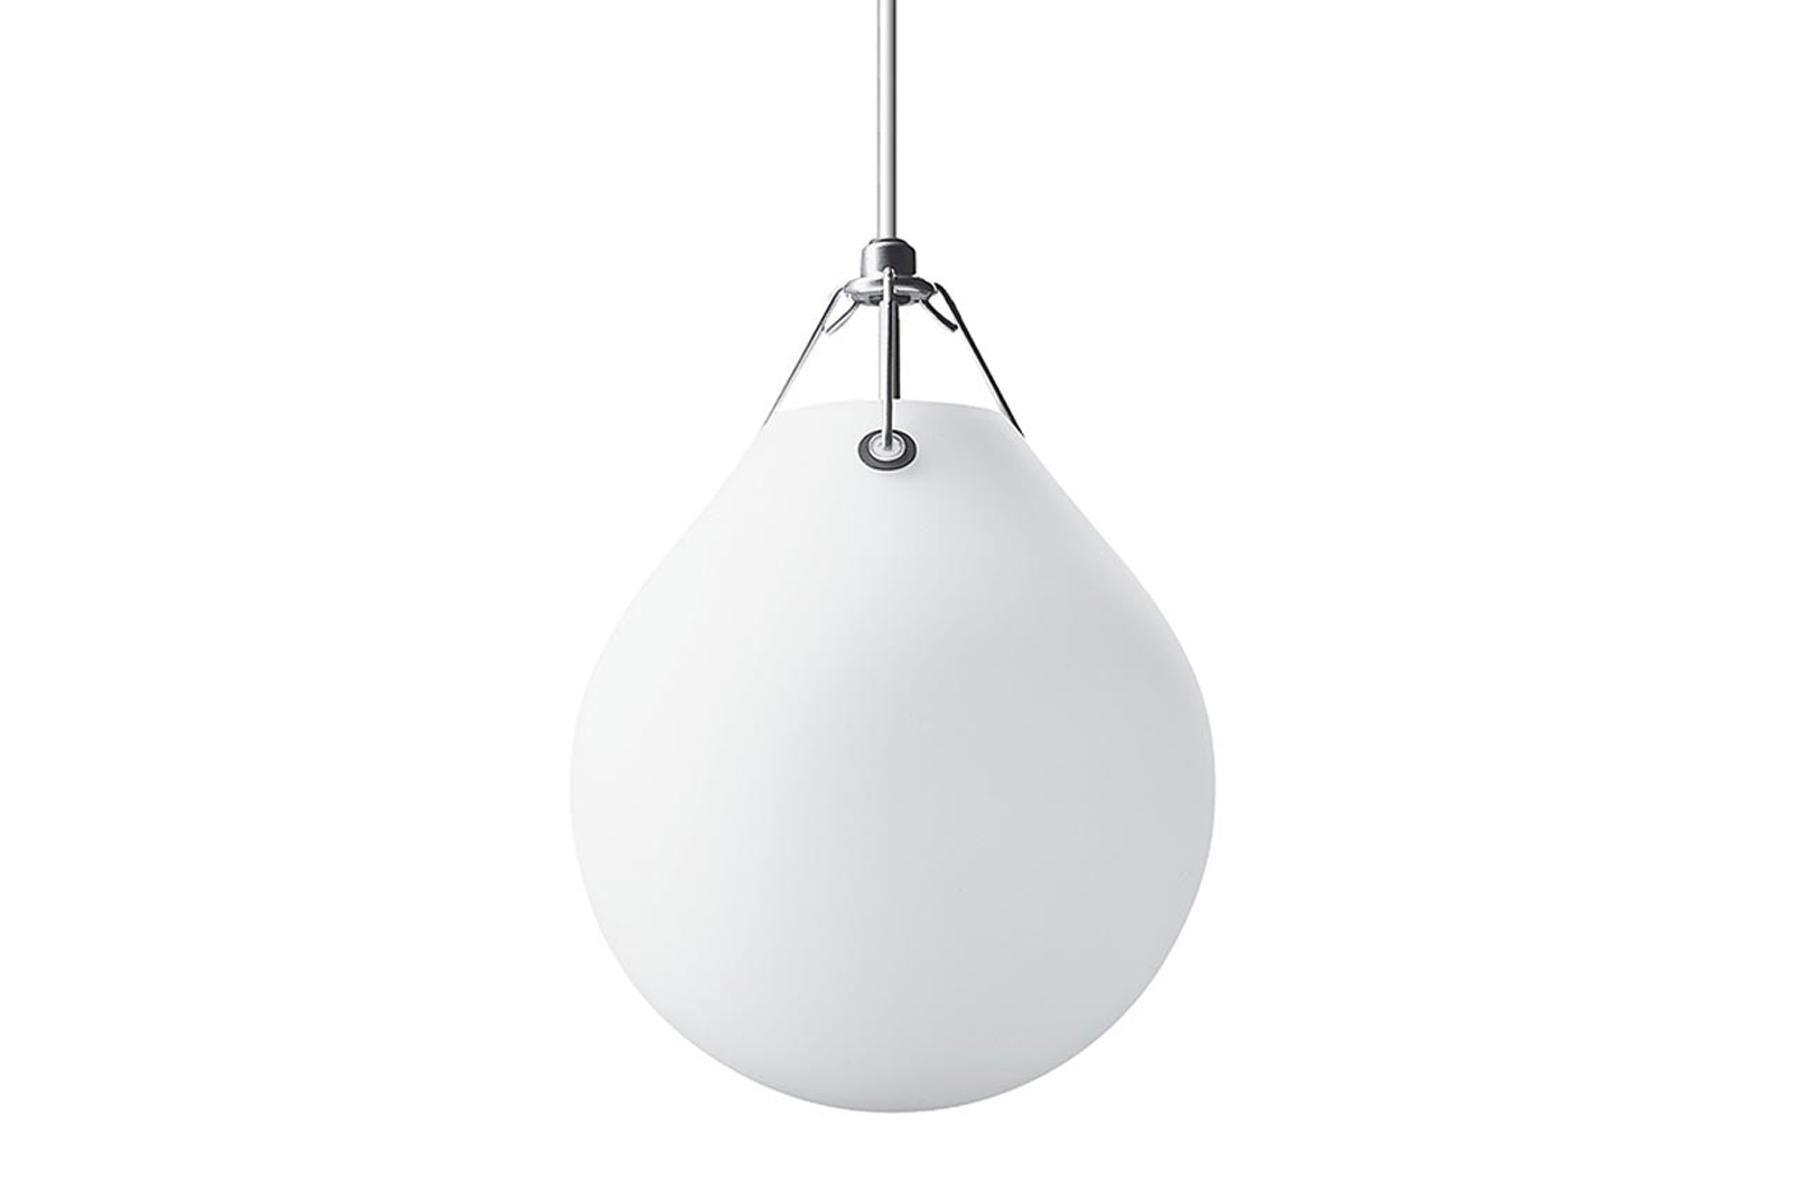 The Moser pendant was designed by Swedish ceramic artist, Anu Moser, in 2002. The designer drew inspiration for the various shapes in the light from observing how molten glass develops when you first start to blow it. The light was developed for